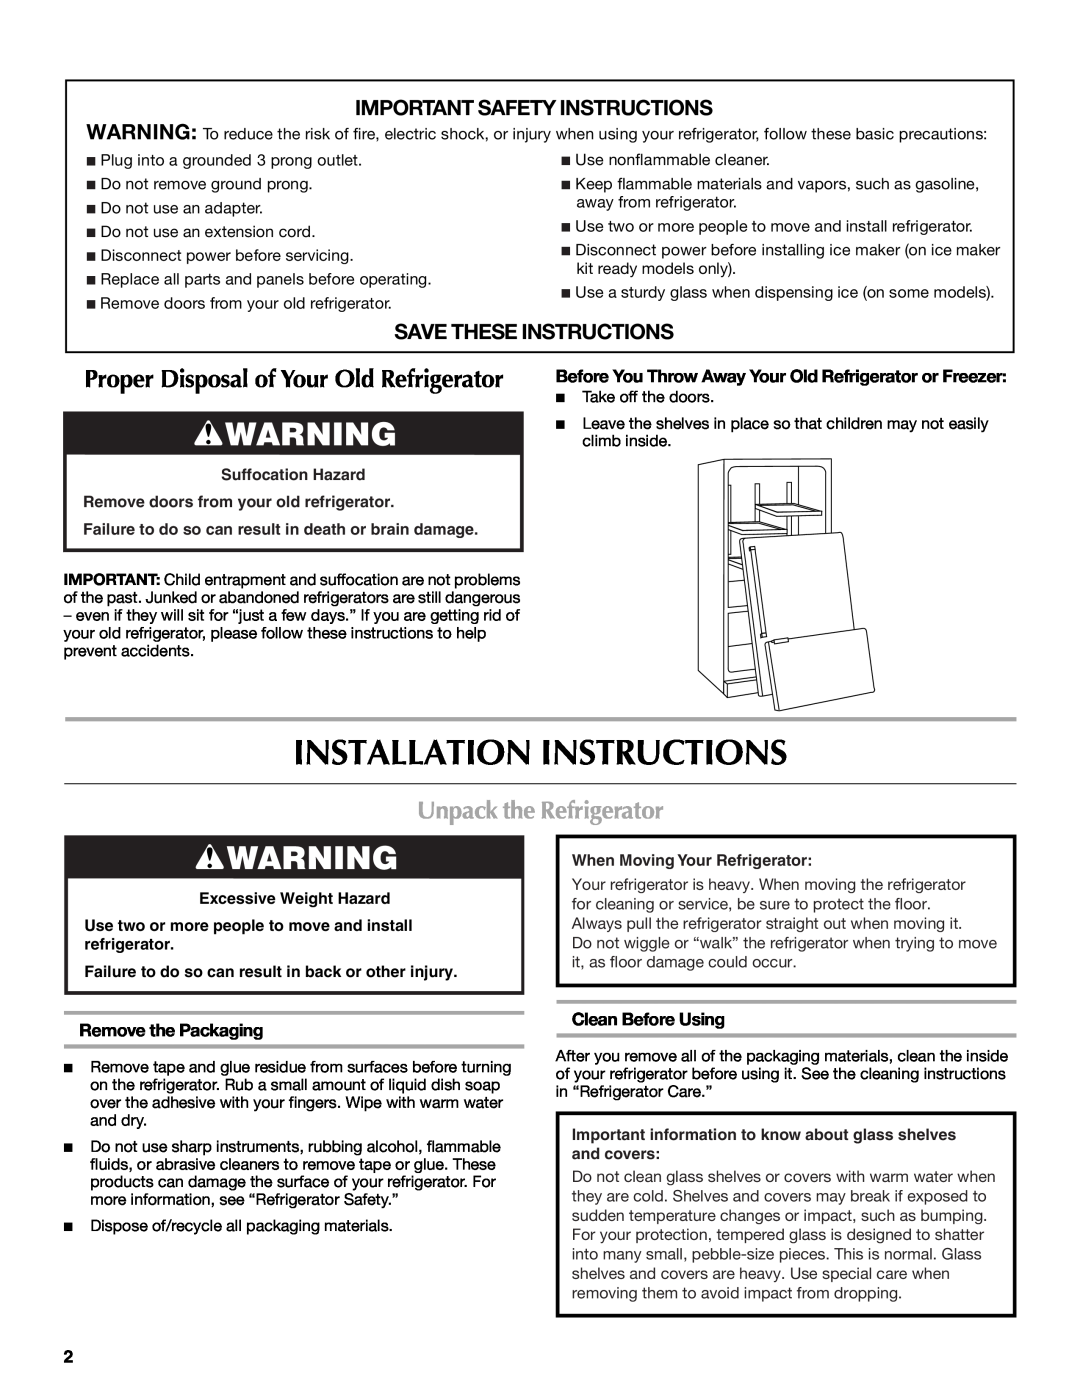 Maytag MFI2568AES, W10175444A Installation Instructions, Unpack the Refrigerator, Proper Disposal of Your Old Refrigerator 